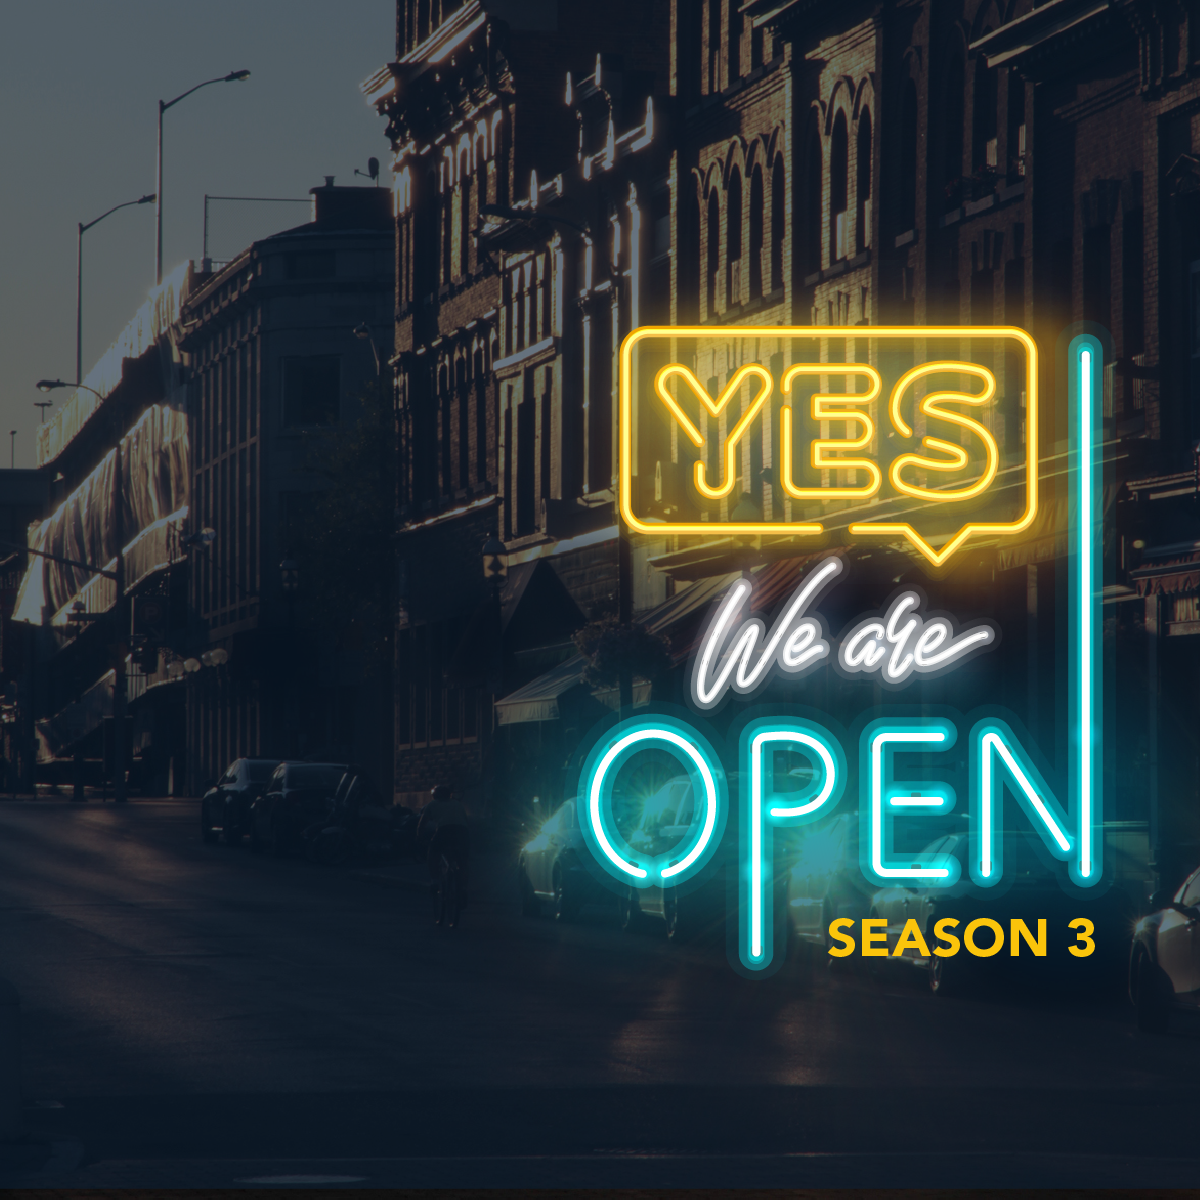 Lakeside Dog Biscuits: "Yes, We Are Open" Season 3 Episode 3